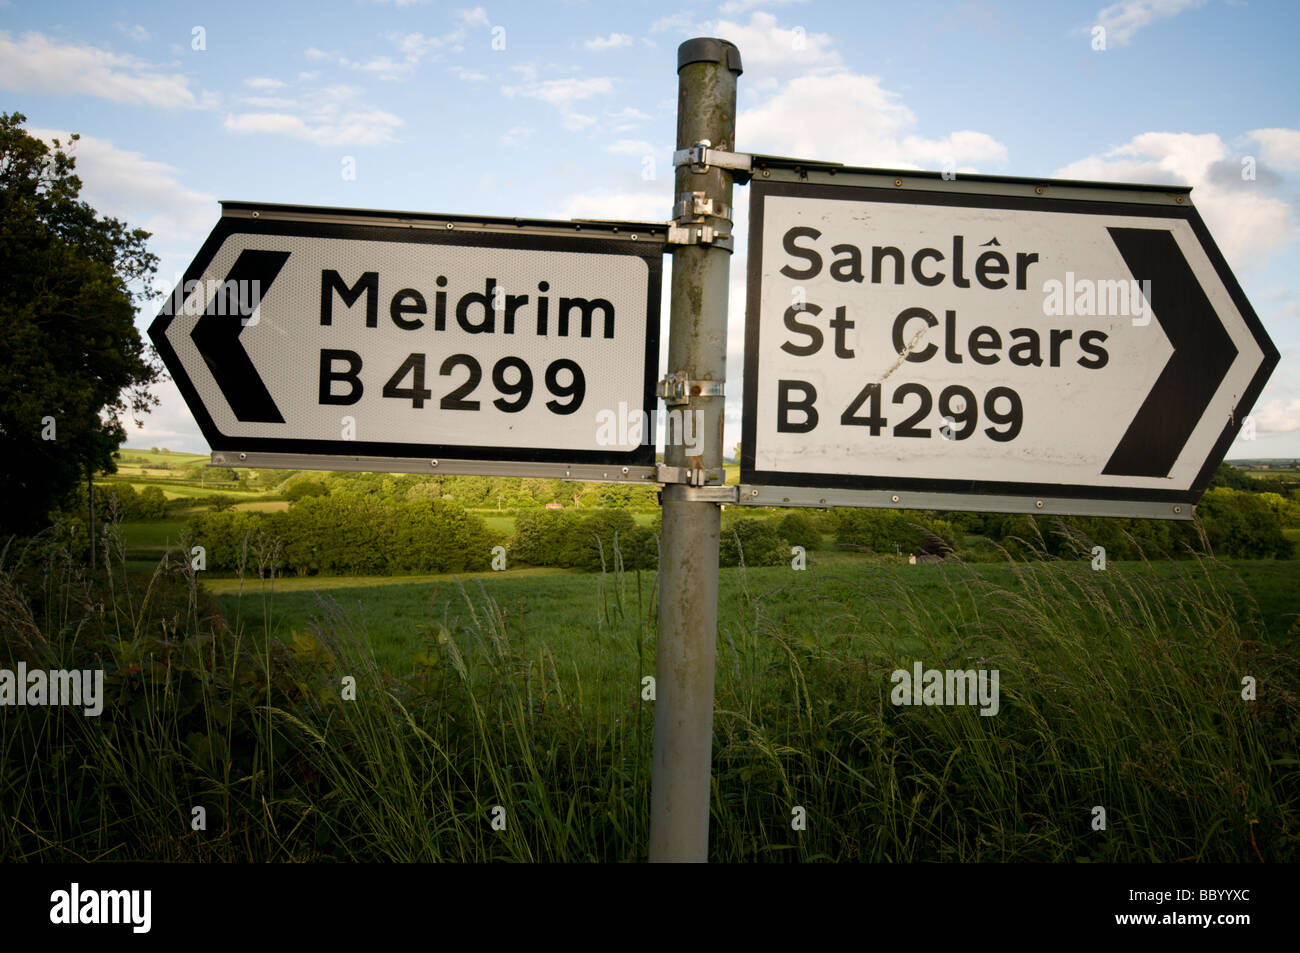 Signpost on the B4299 Between Meidrim and St.Clears Stock Photo